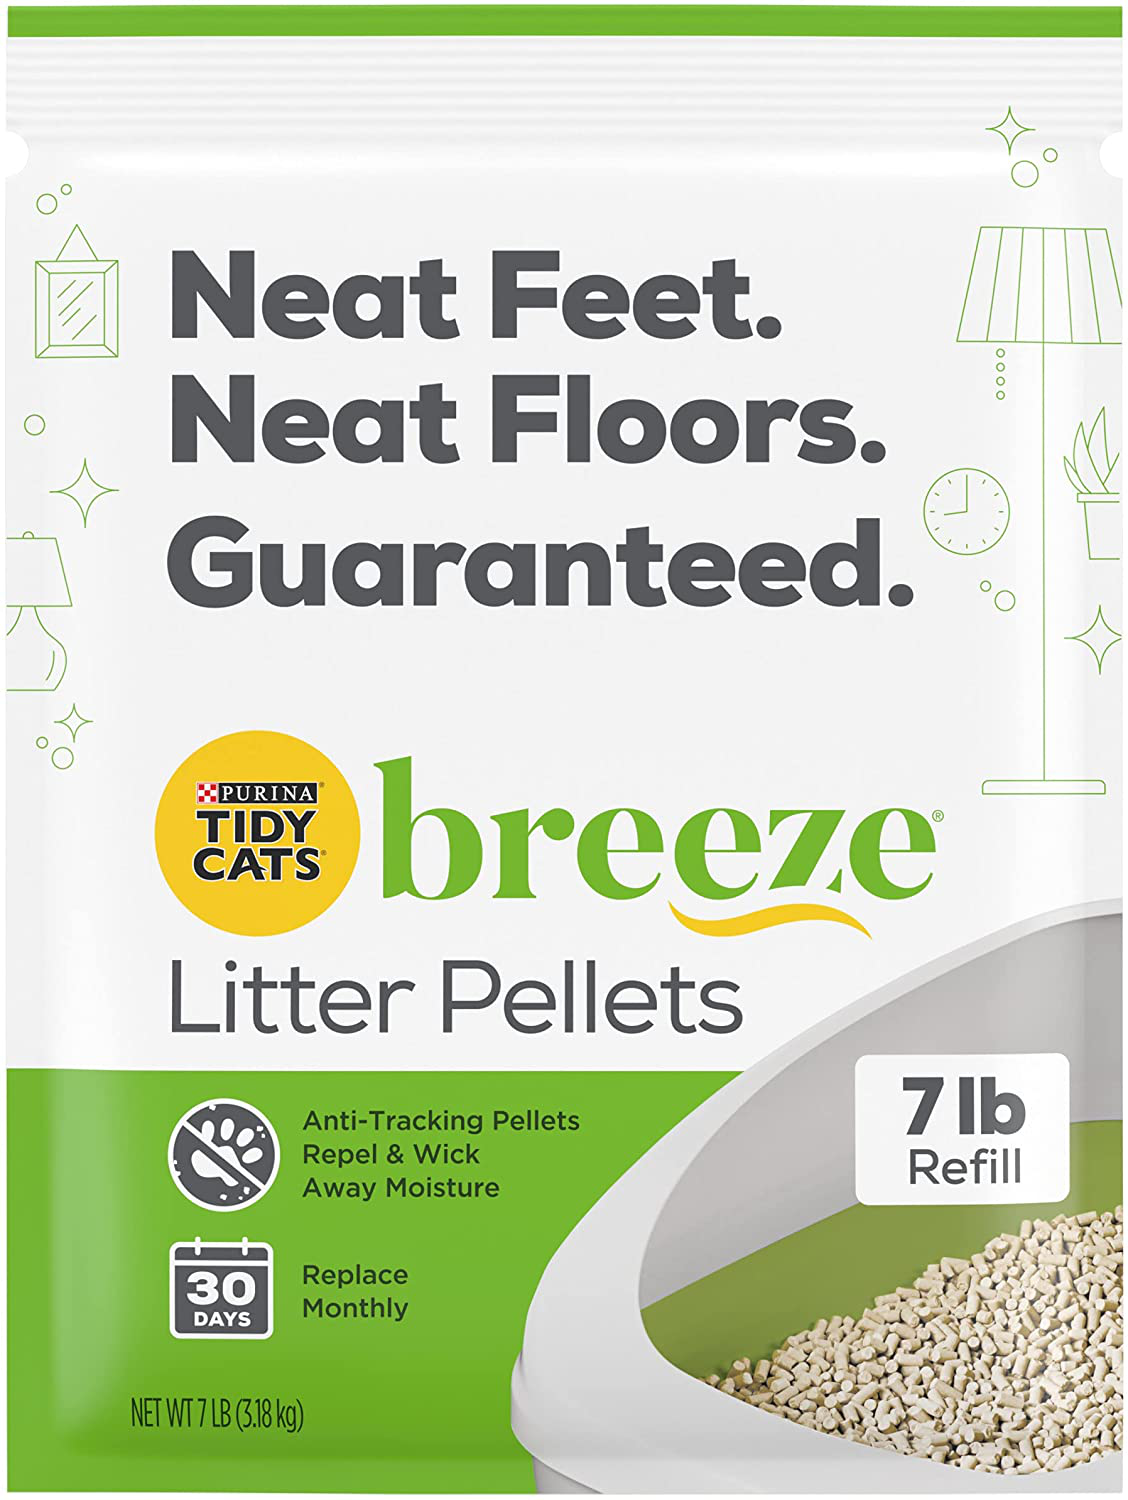 Purina Tidy Cats Breeze Refill Litter Pellets, 7 Pound (Pack of 4)